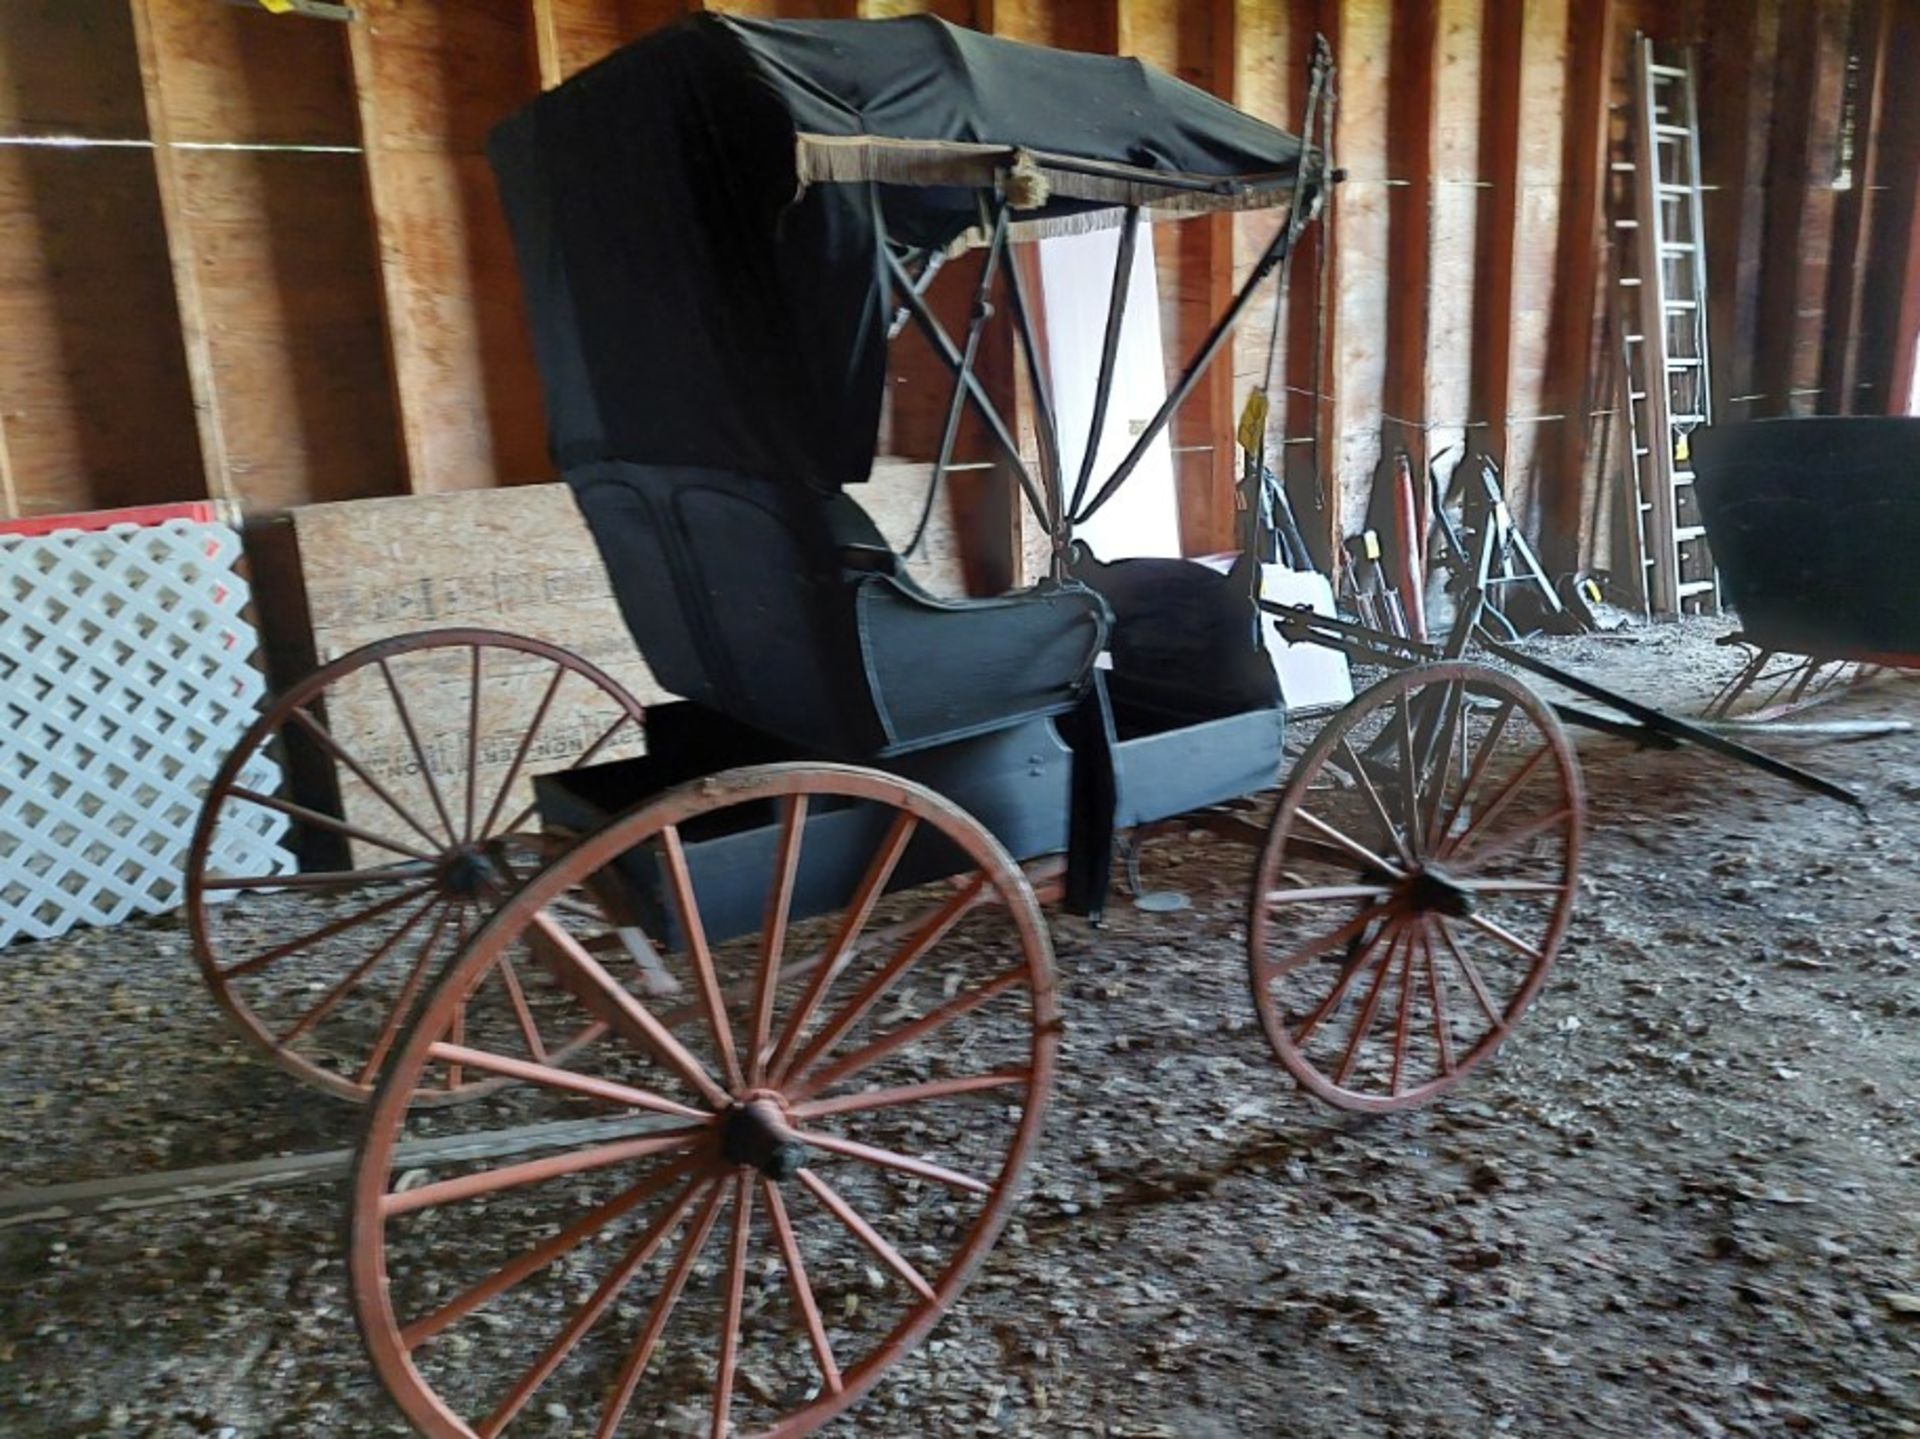 ANTIQUE HORSE DRAWN DOCTORS BUGGY (SAID TO BE ORIGINAL) - Image 5 of 7